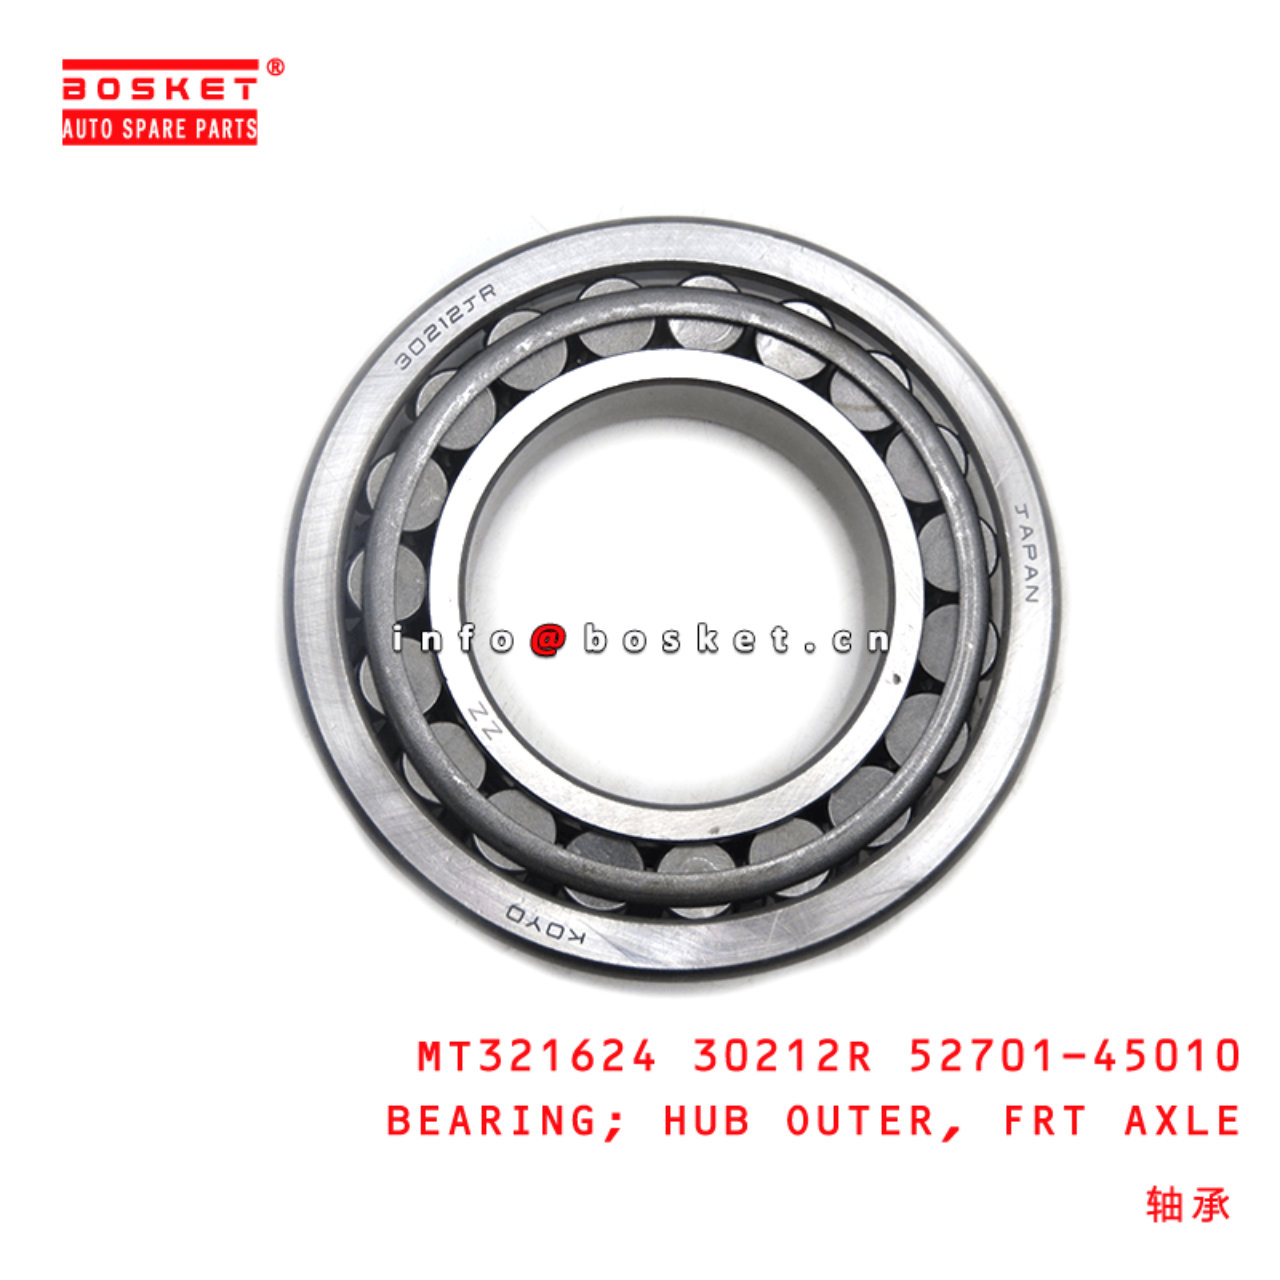 MT321624 30212R 52701-45010 Front Axle Hub Outer Bearing Suitable For MITSUBISHI FUSO 